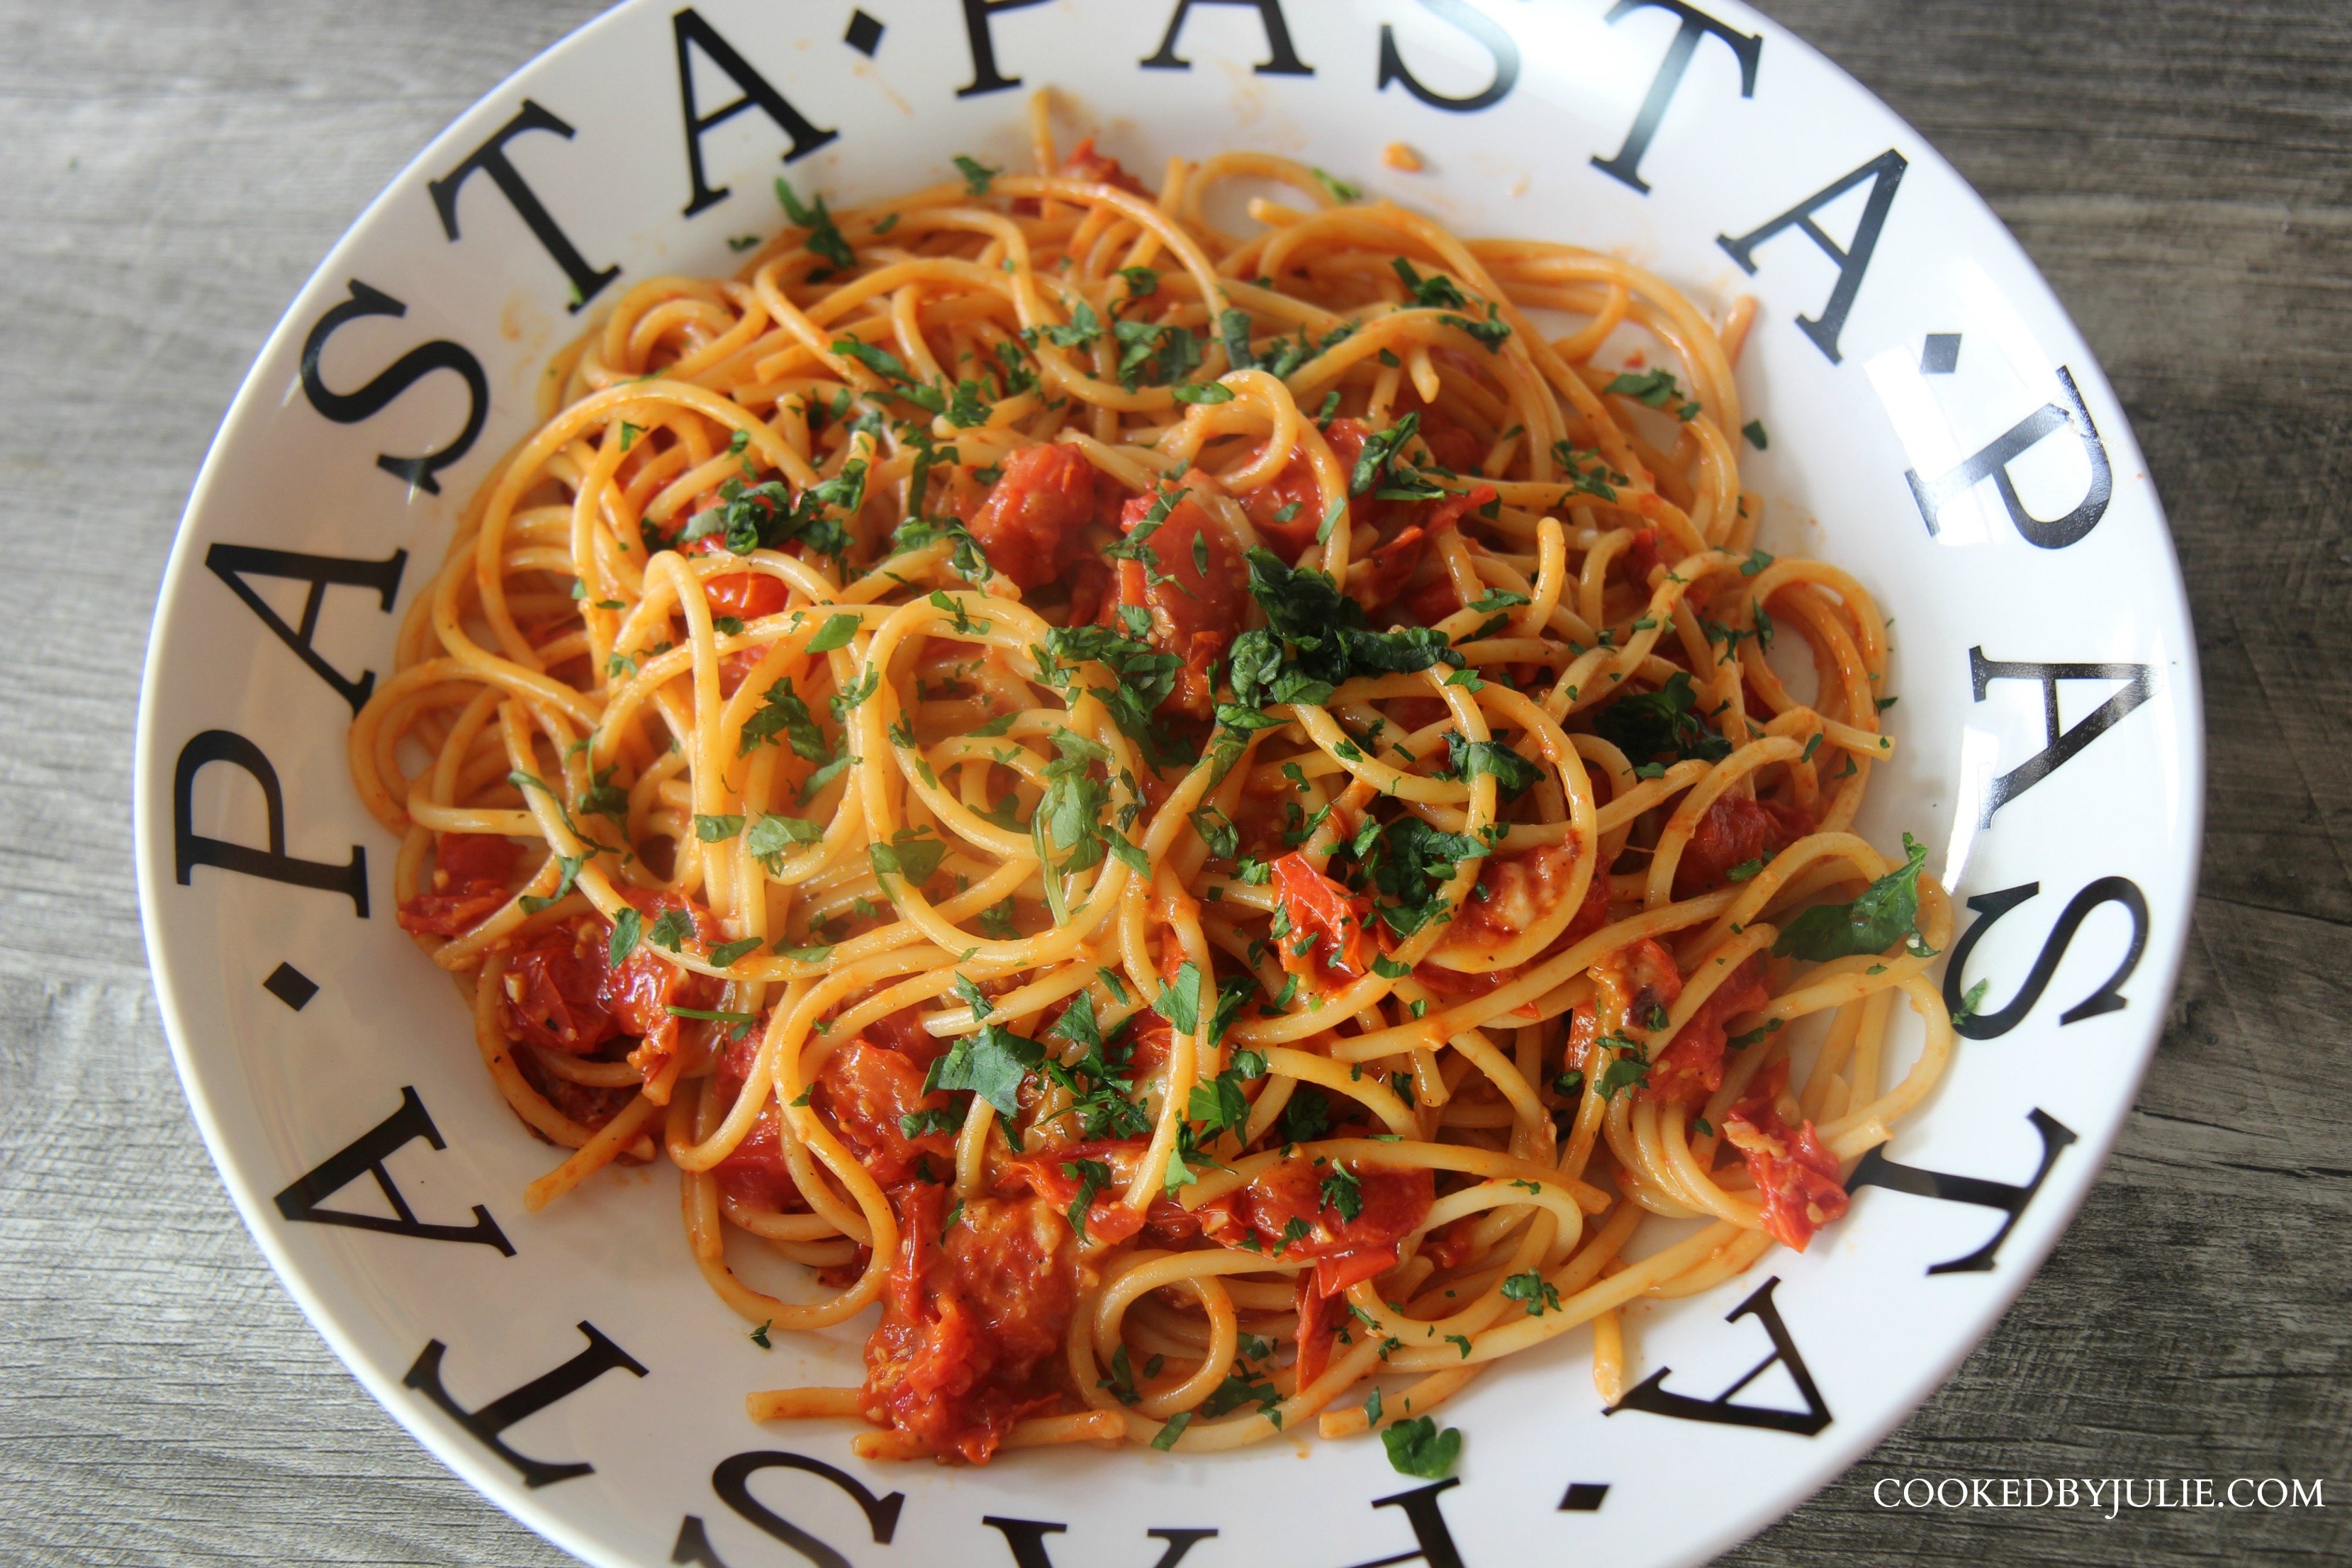 This roasted tomato bucatini is such a refreshing pasta dish with cheese and fresh roasted tomatoes